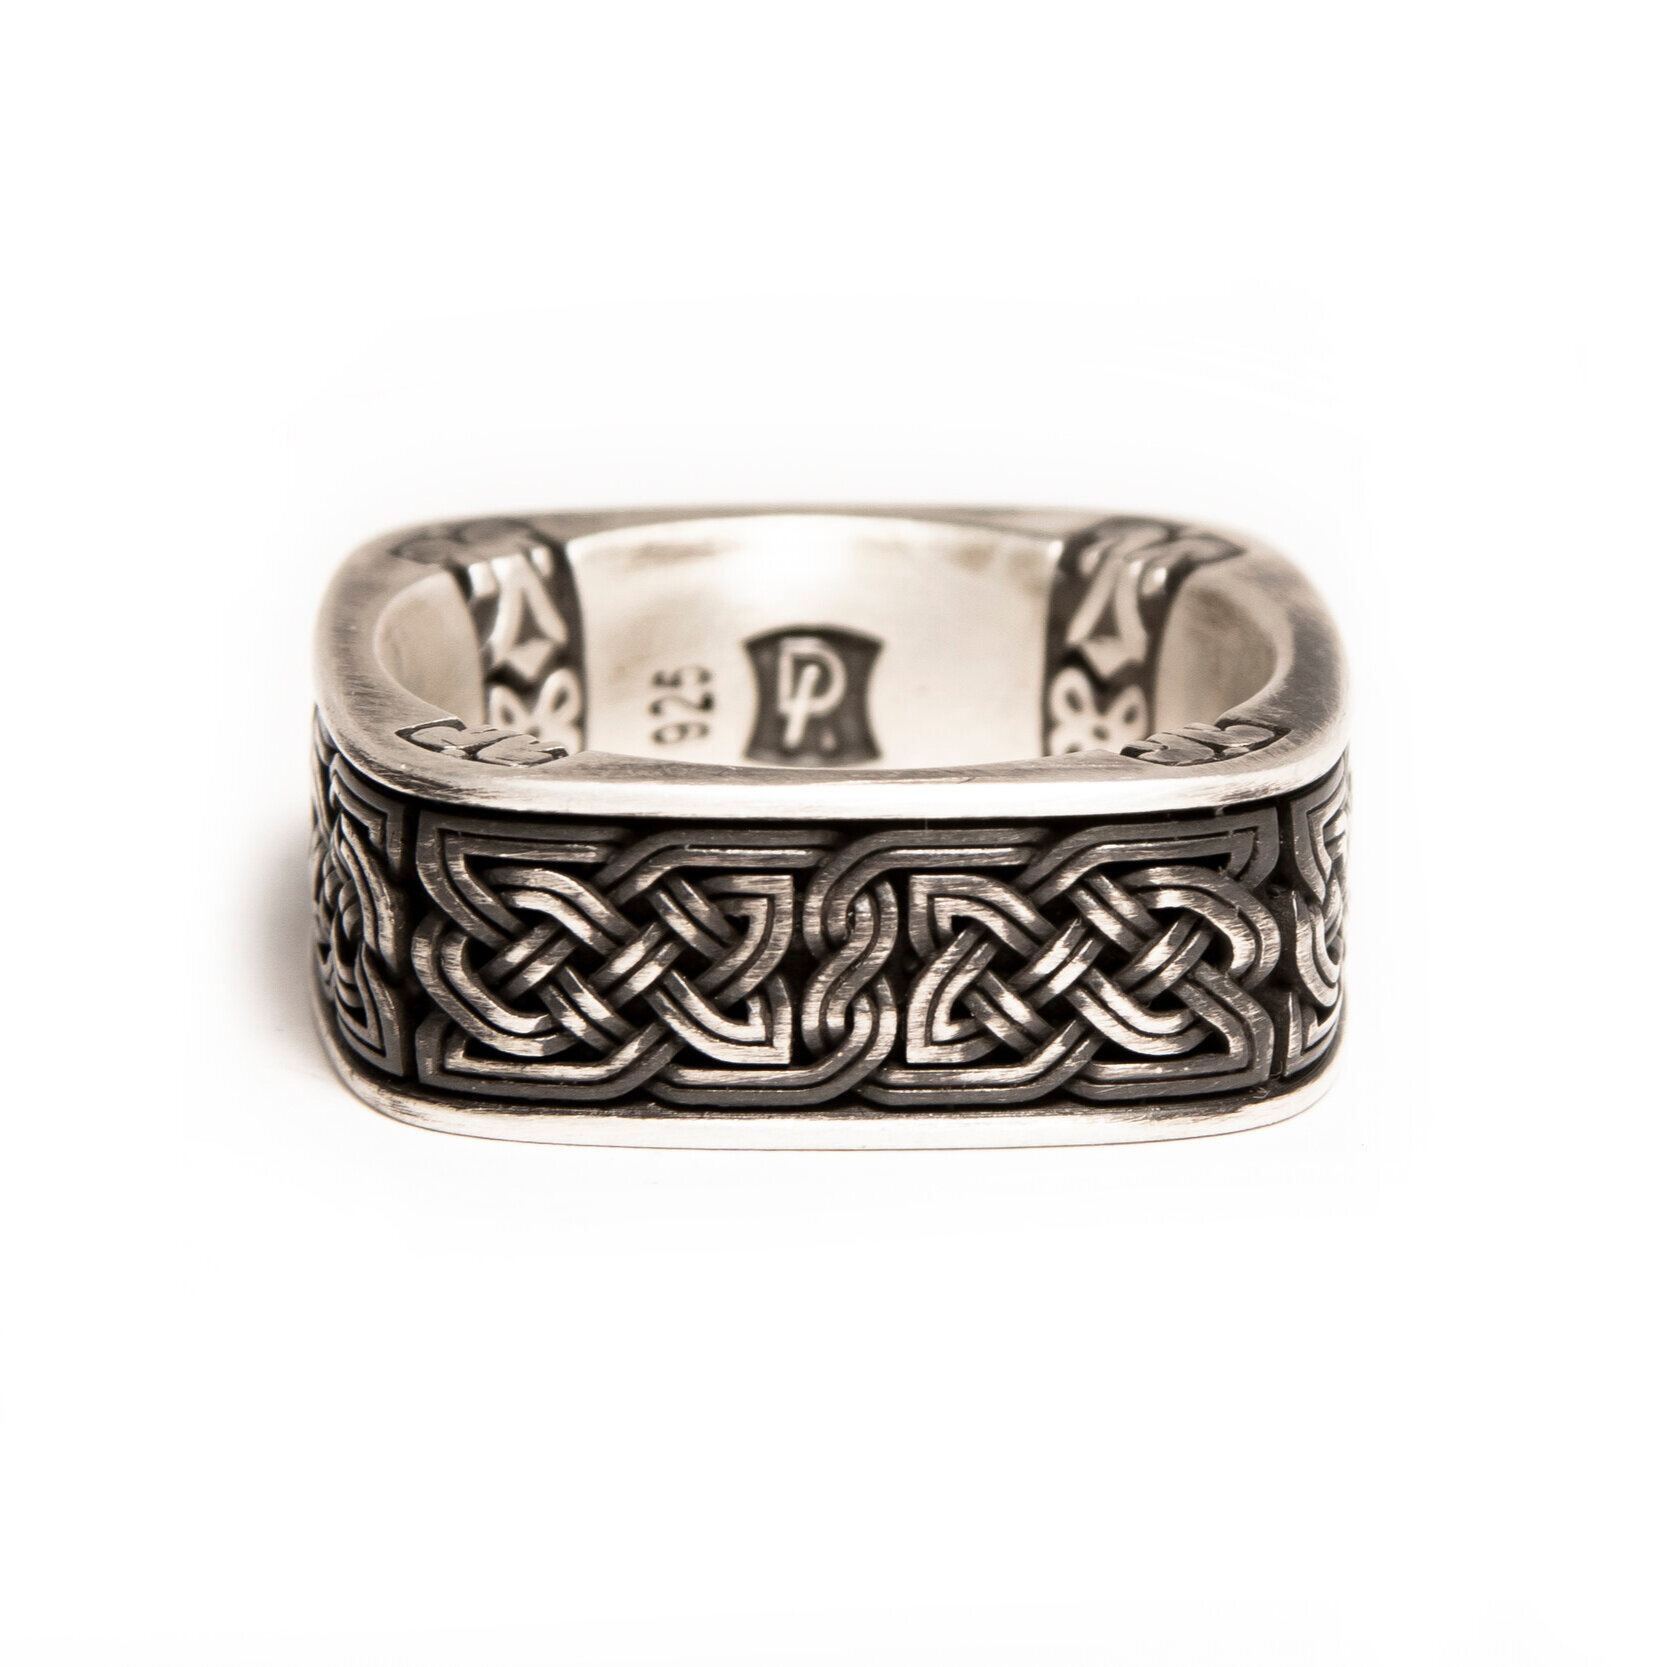 Square Celtic Knot ring with corner patterns in sterling silver — Dana Arts